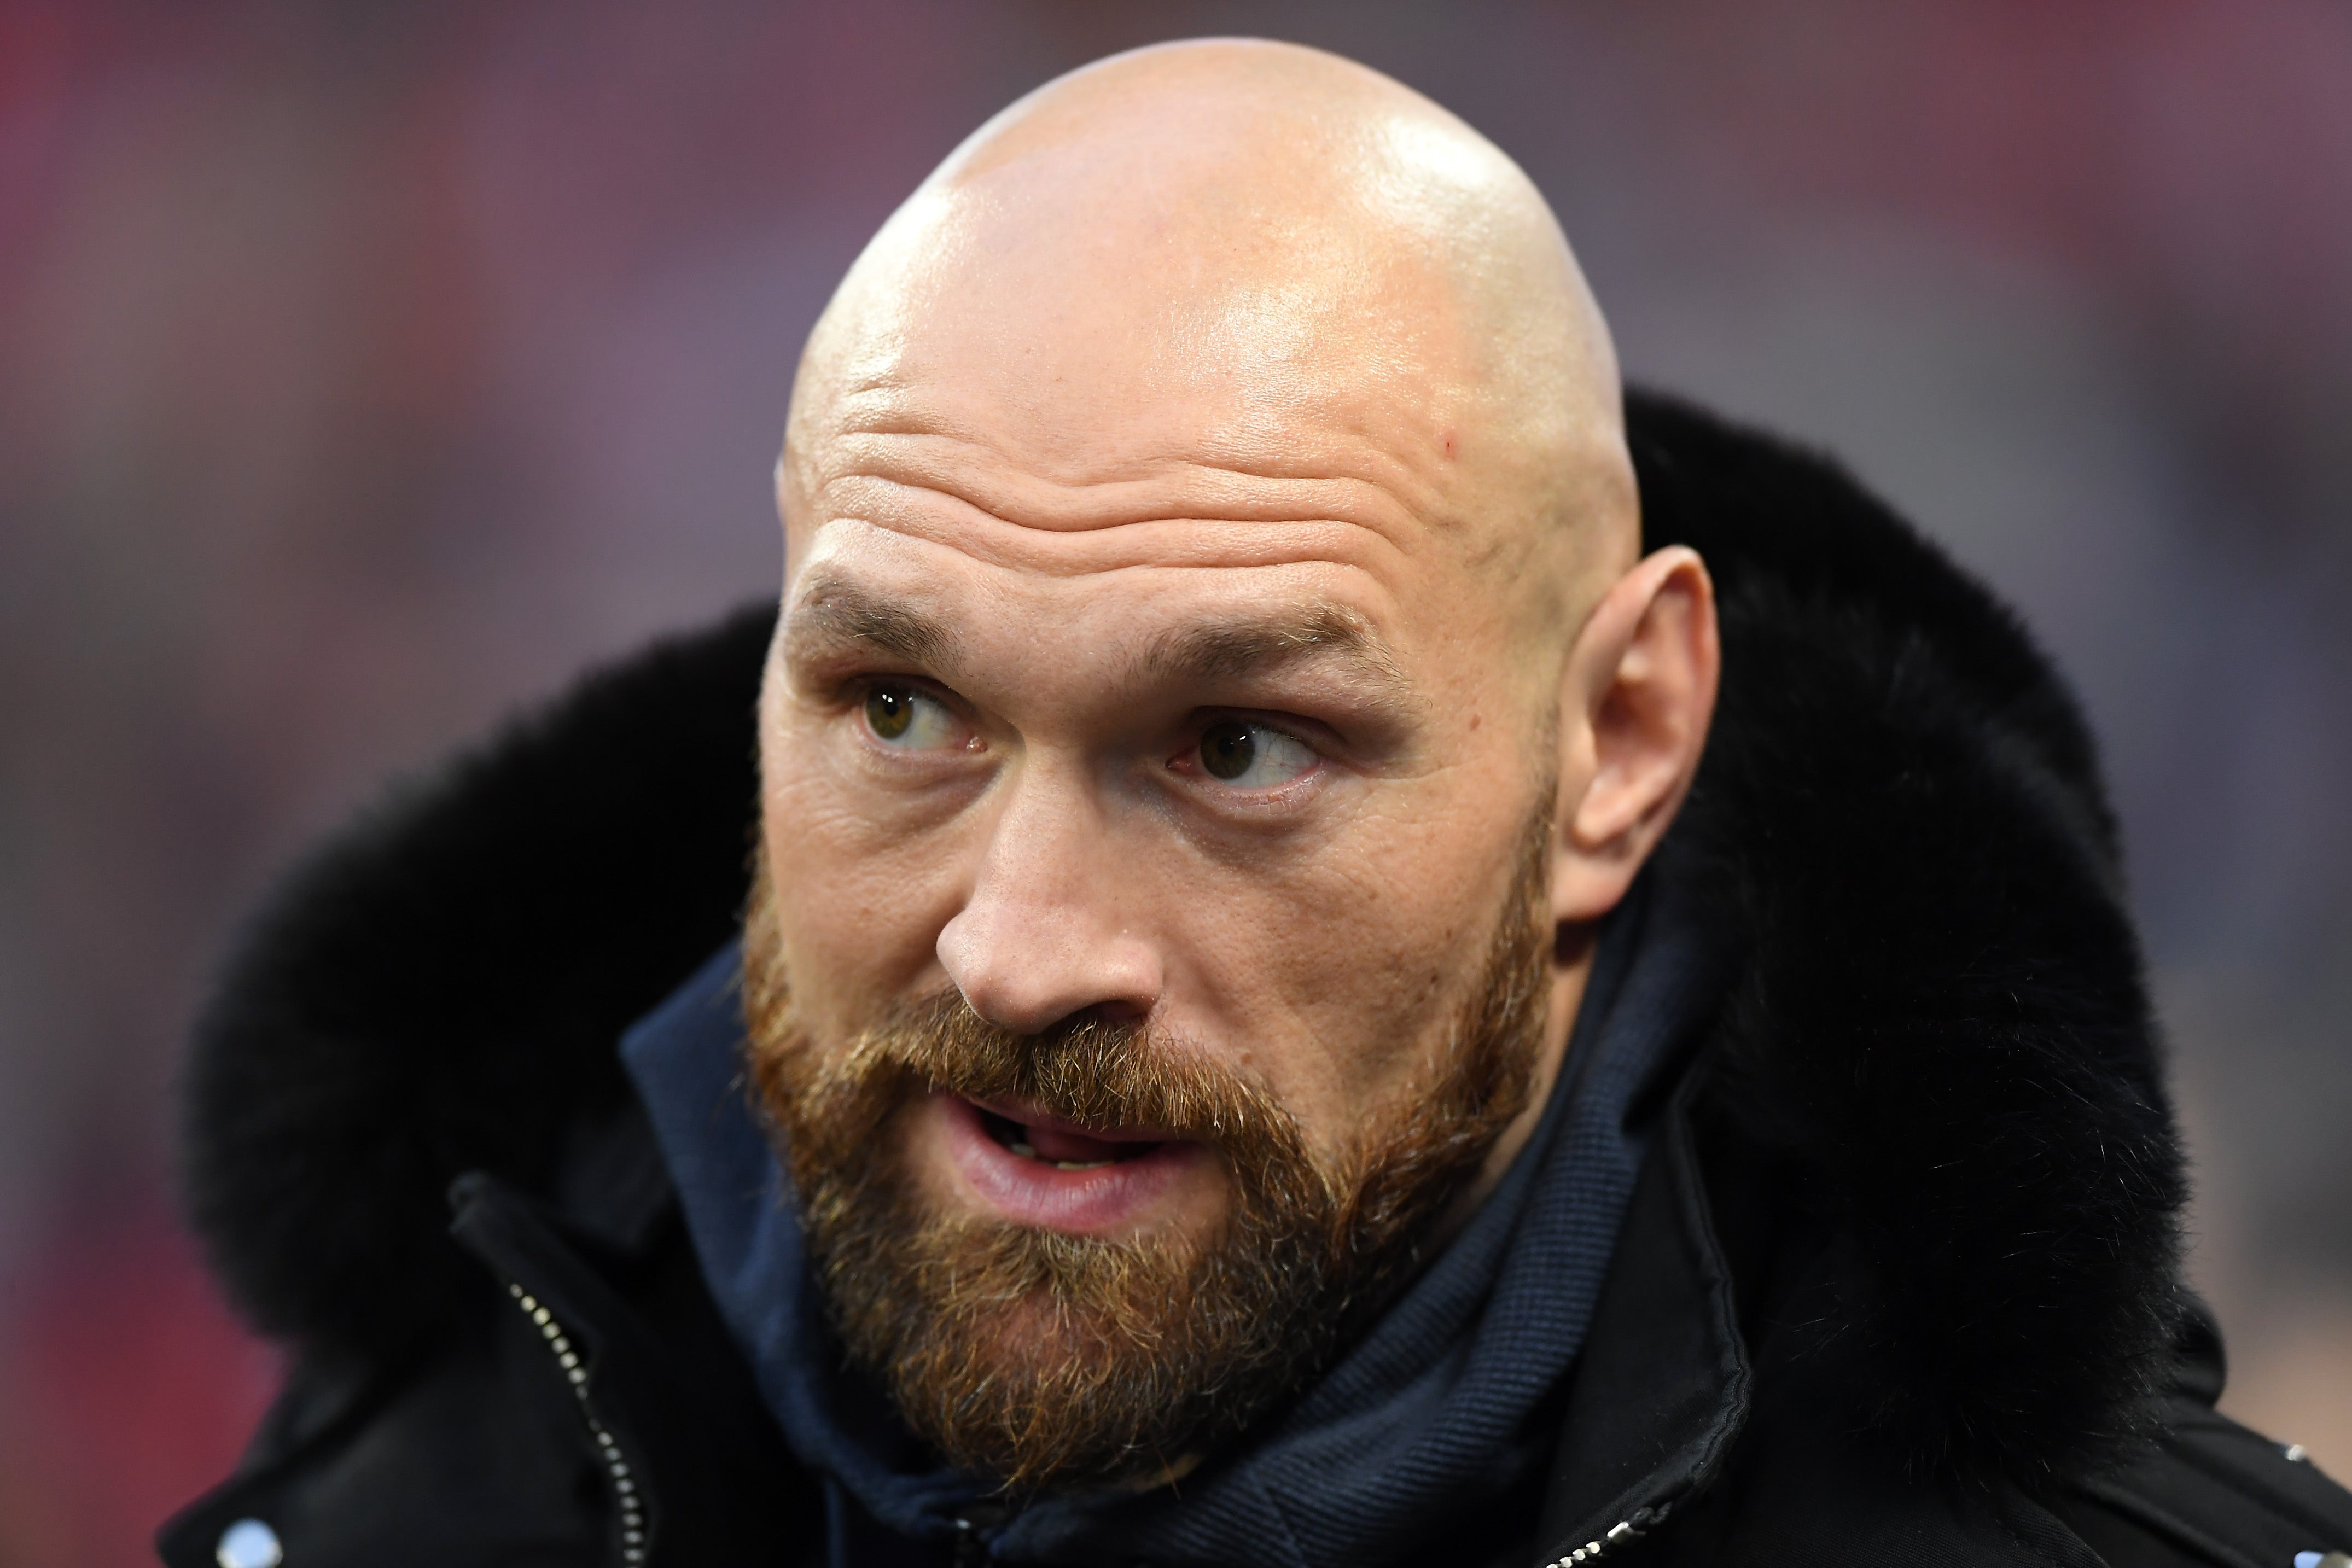 Fury has spoken about his daughter’s intensive care stay